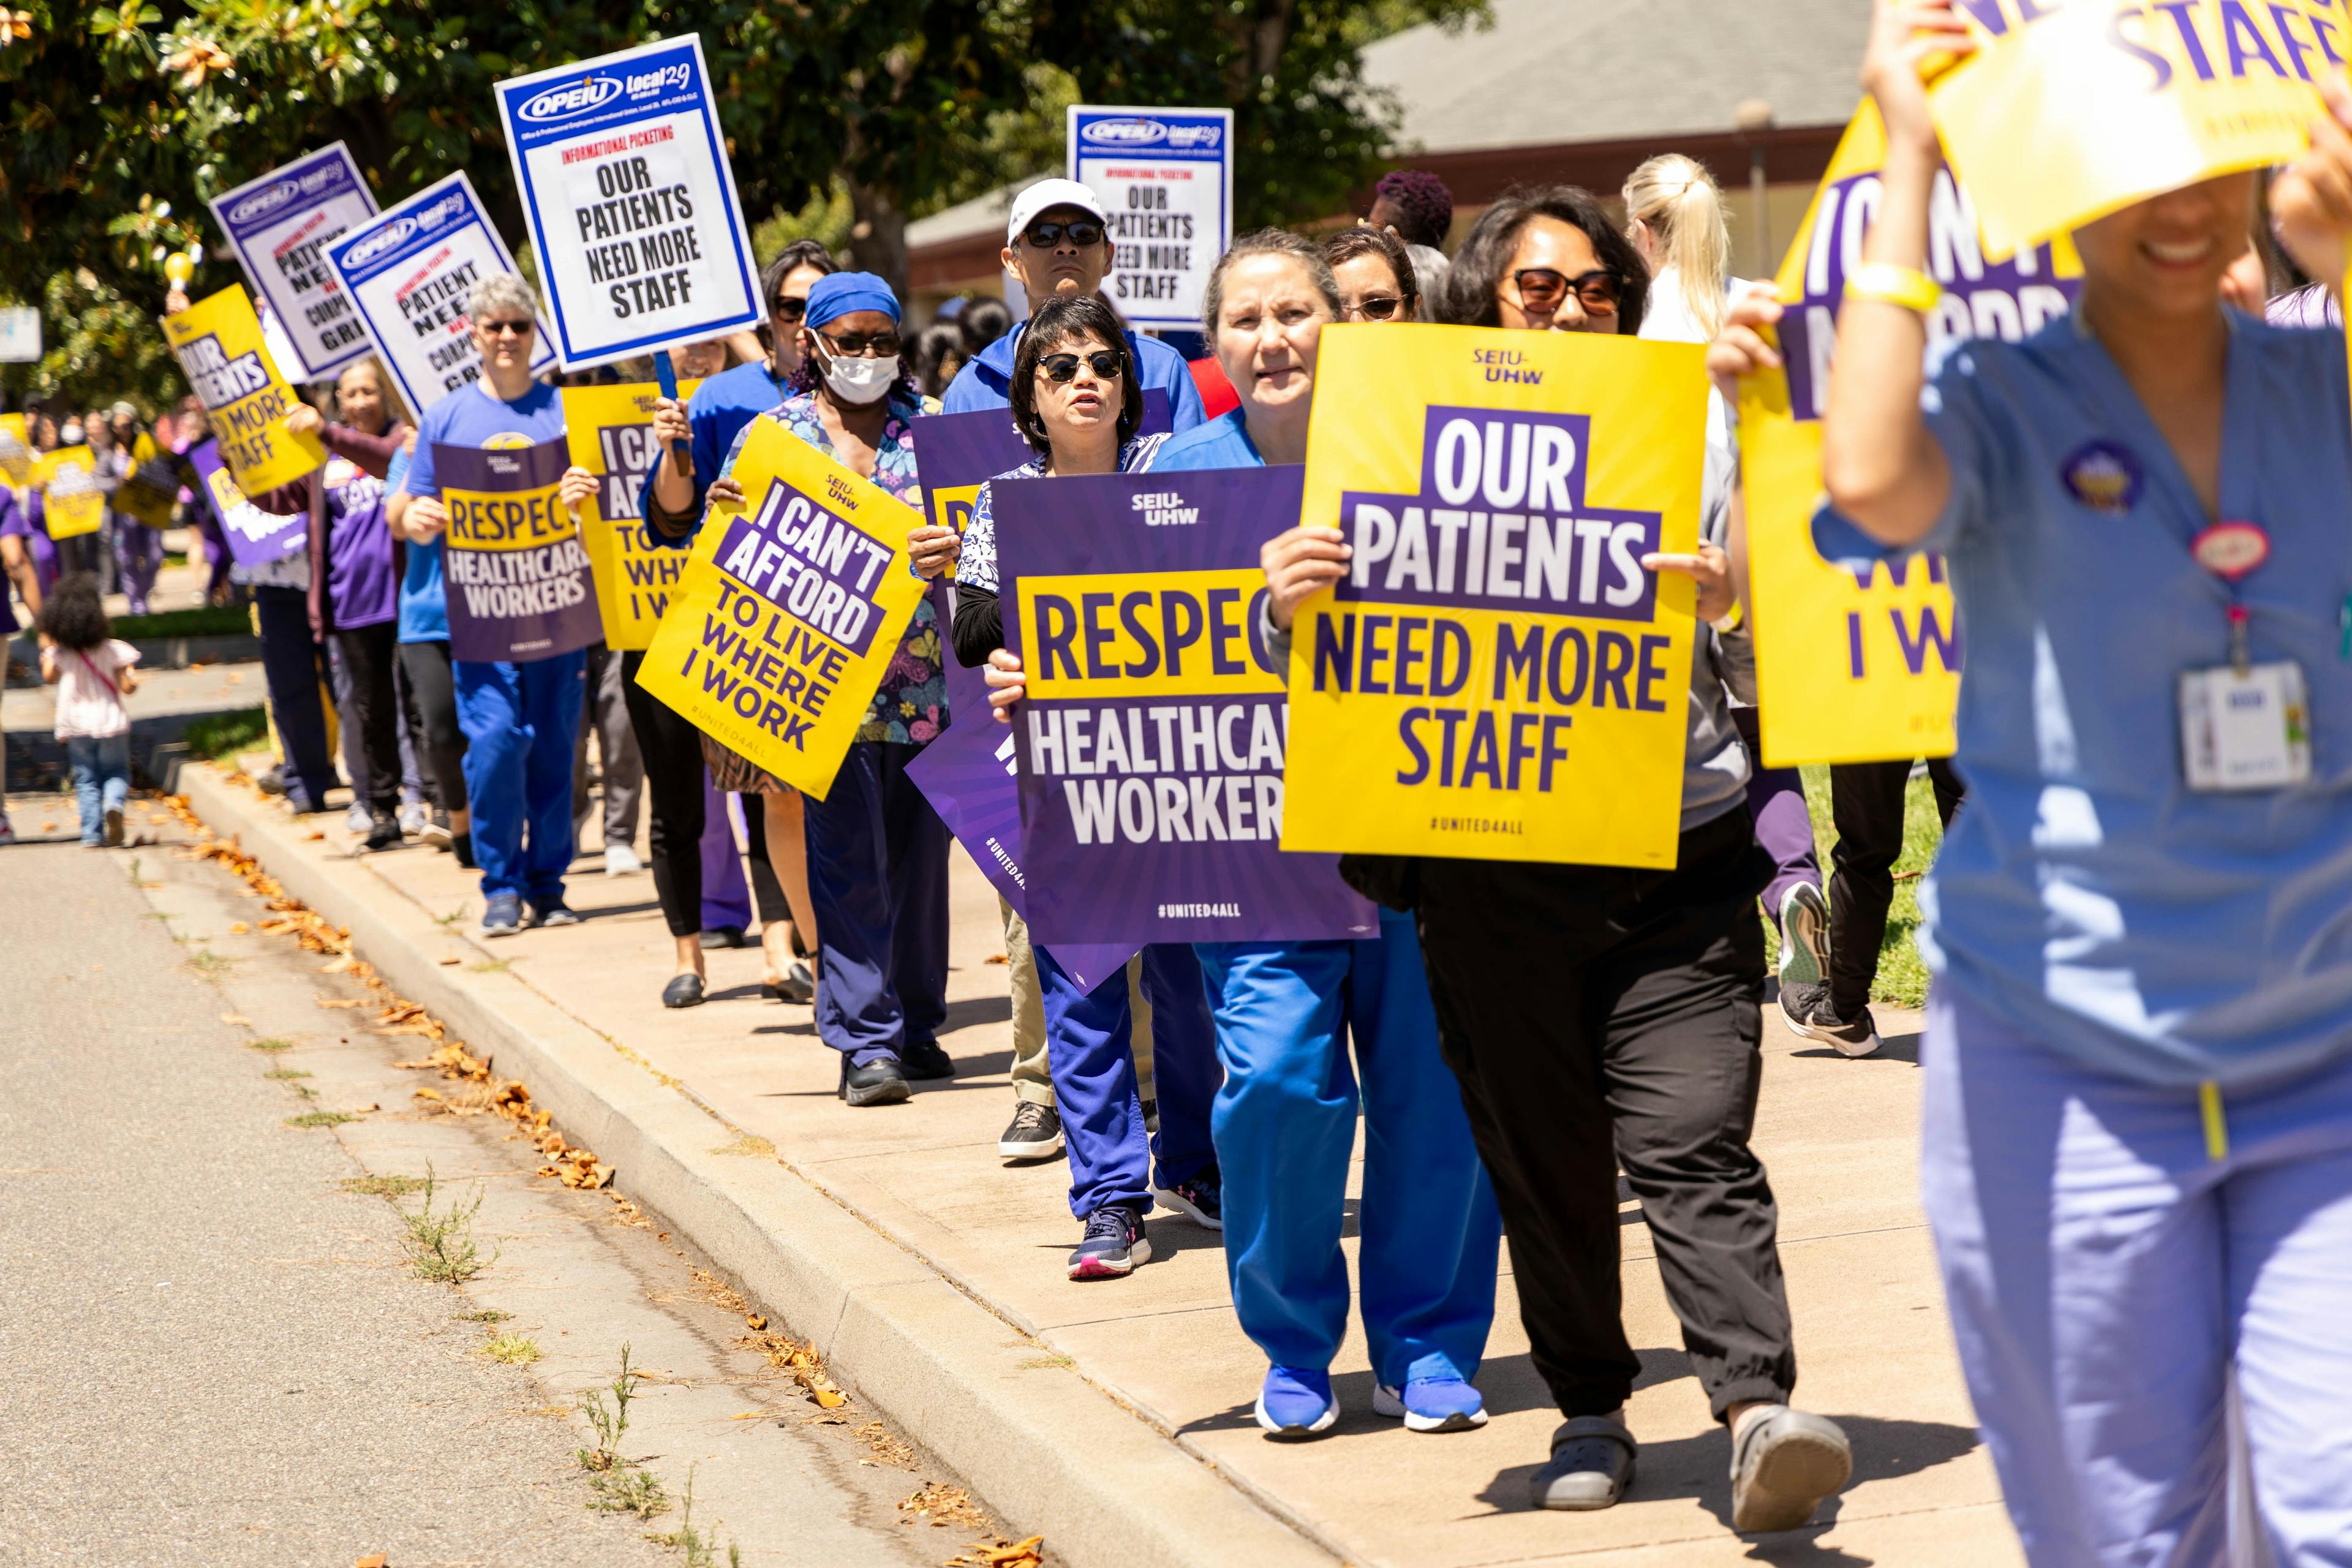 Union workers at Kaiser Permanente have begun a strike. Workers with SEIU-UHW, shown here picketing in July, and other unions say they're seeking better compensation and staffing. (Image: SEIU-UHW)